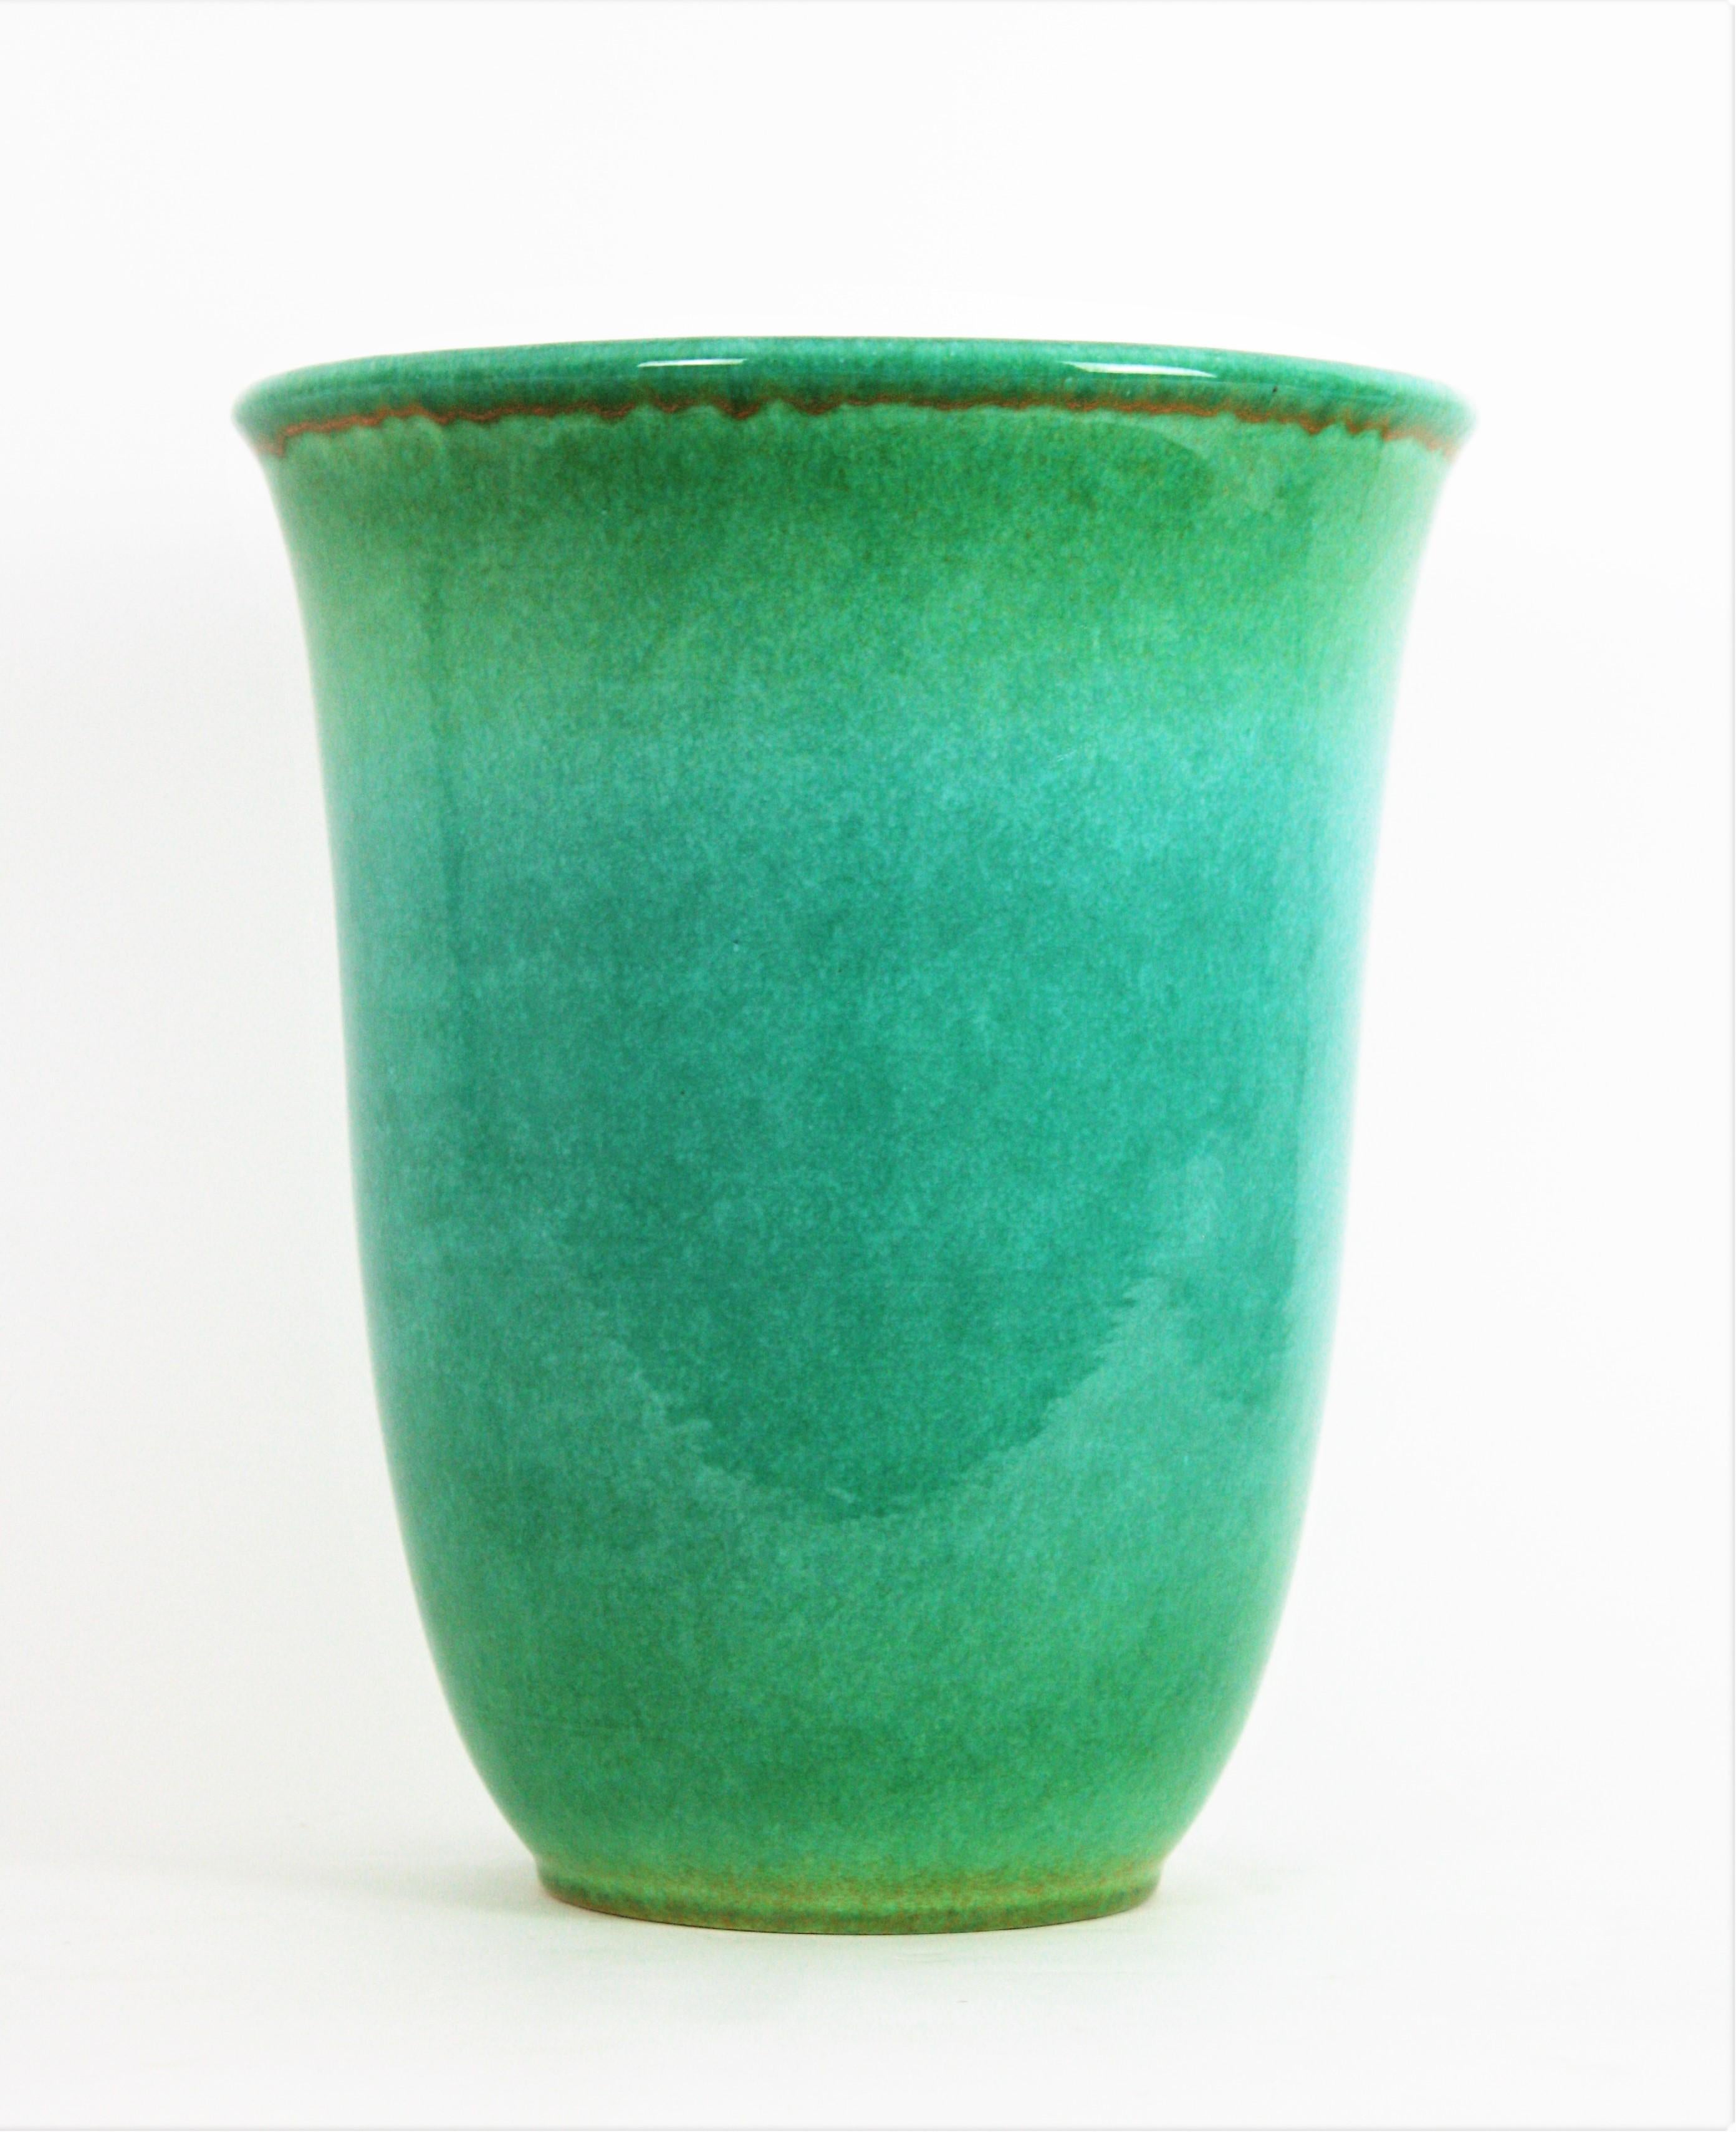 Massive Art Deco Turquoise blue ceramic vase with gilt accents by Serra, Spain, 1930s.
This elegant bell-shaped vase was designed by Josep Serra and manufactured by Cerámicas Serra. It has an amazing color with shades from green to turquoise blue